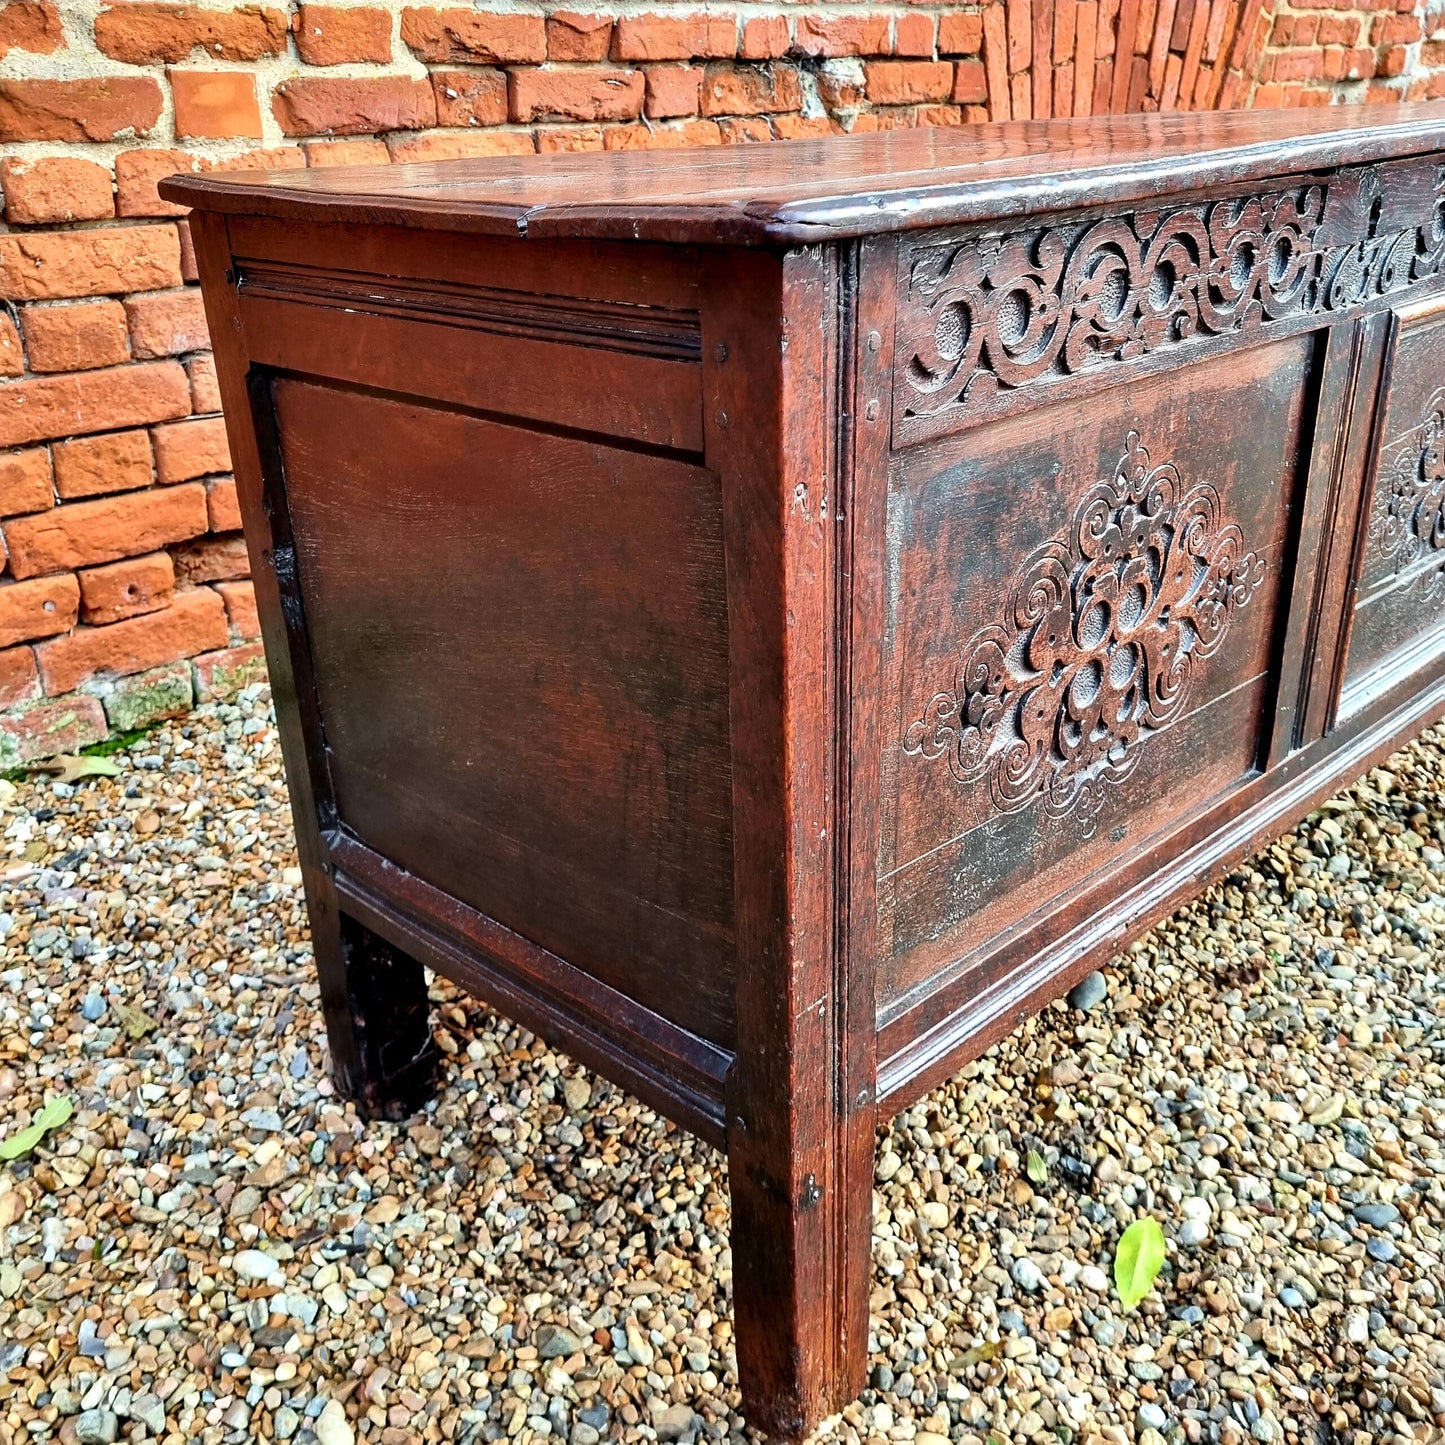 17th Century English Antique Oak Panelled Coffer or Chest, Dated "1676"